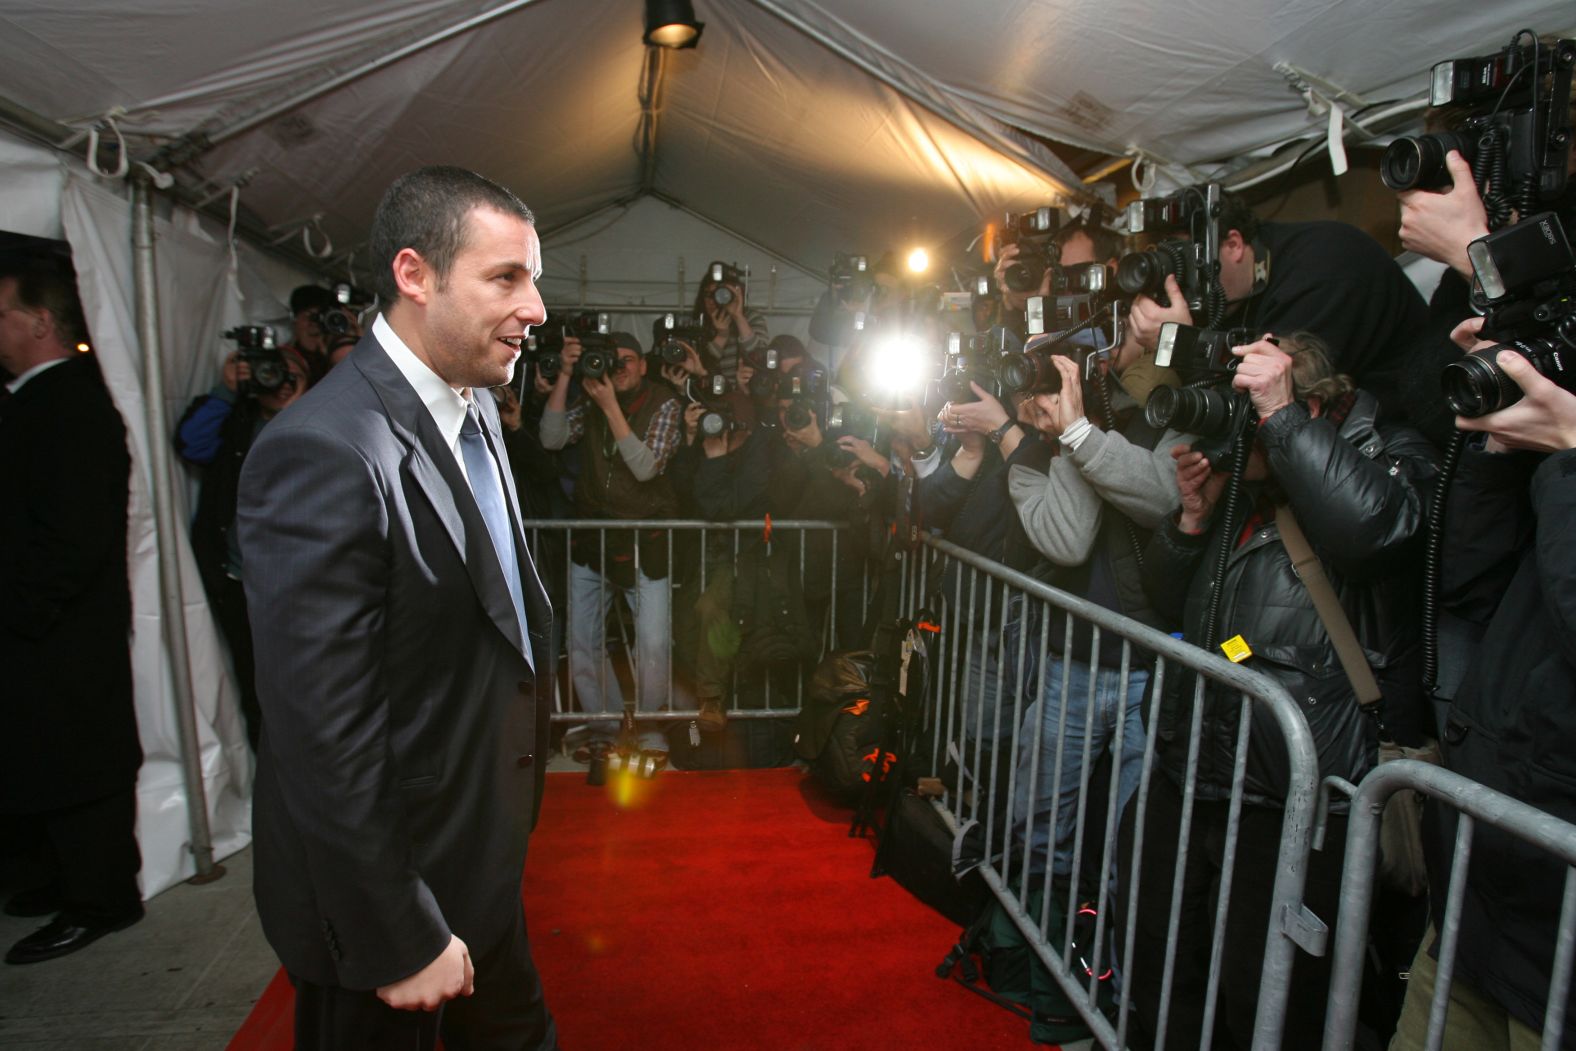 Sandler attends the premiere of the film "Reign Over Me" in 2007.